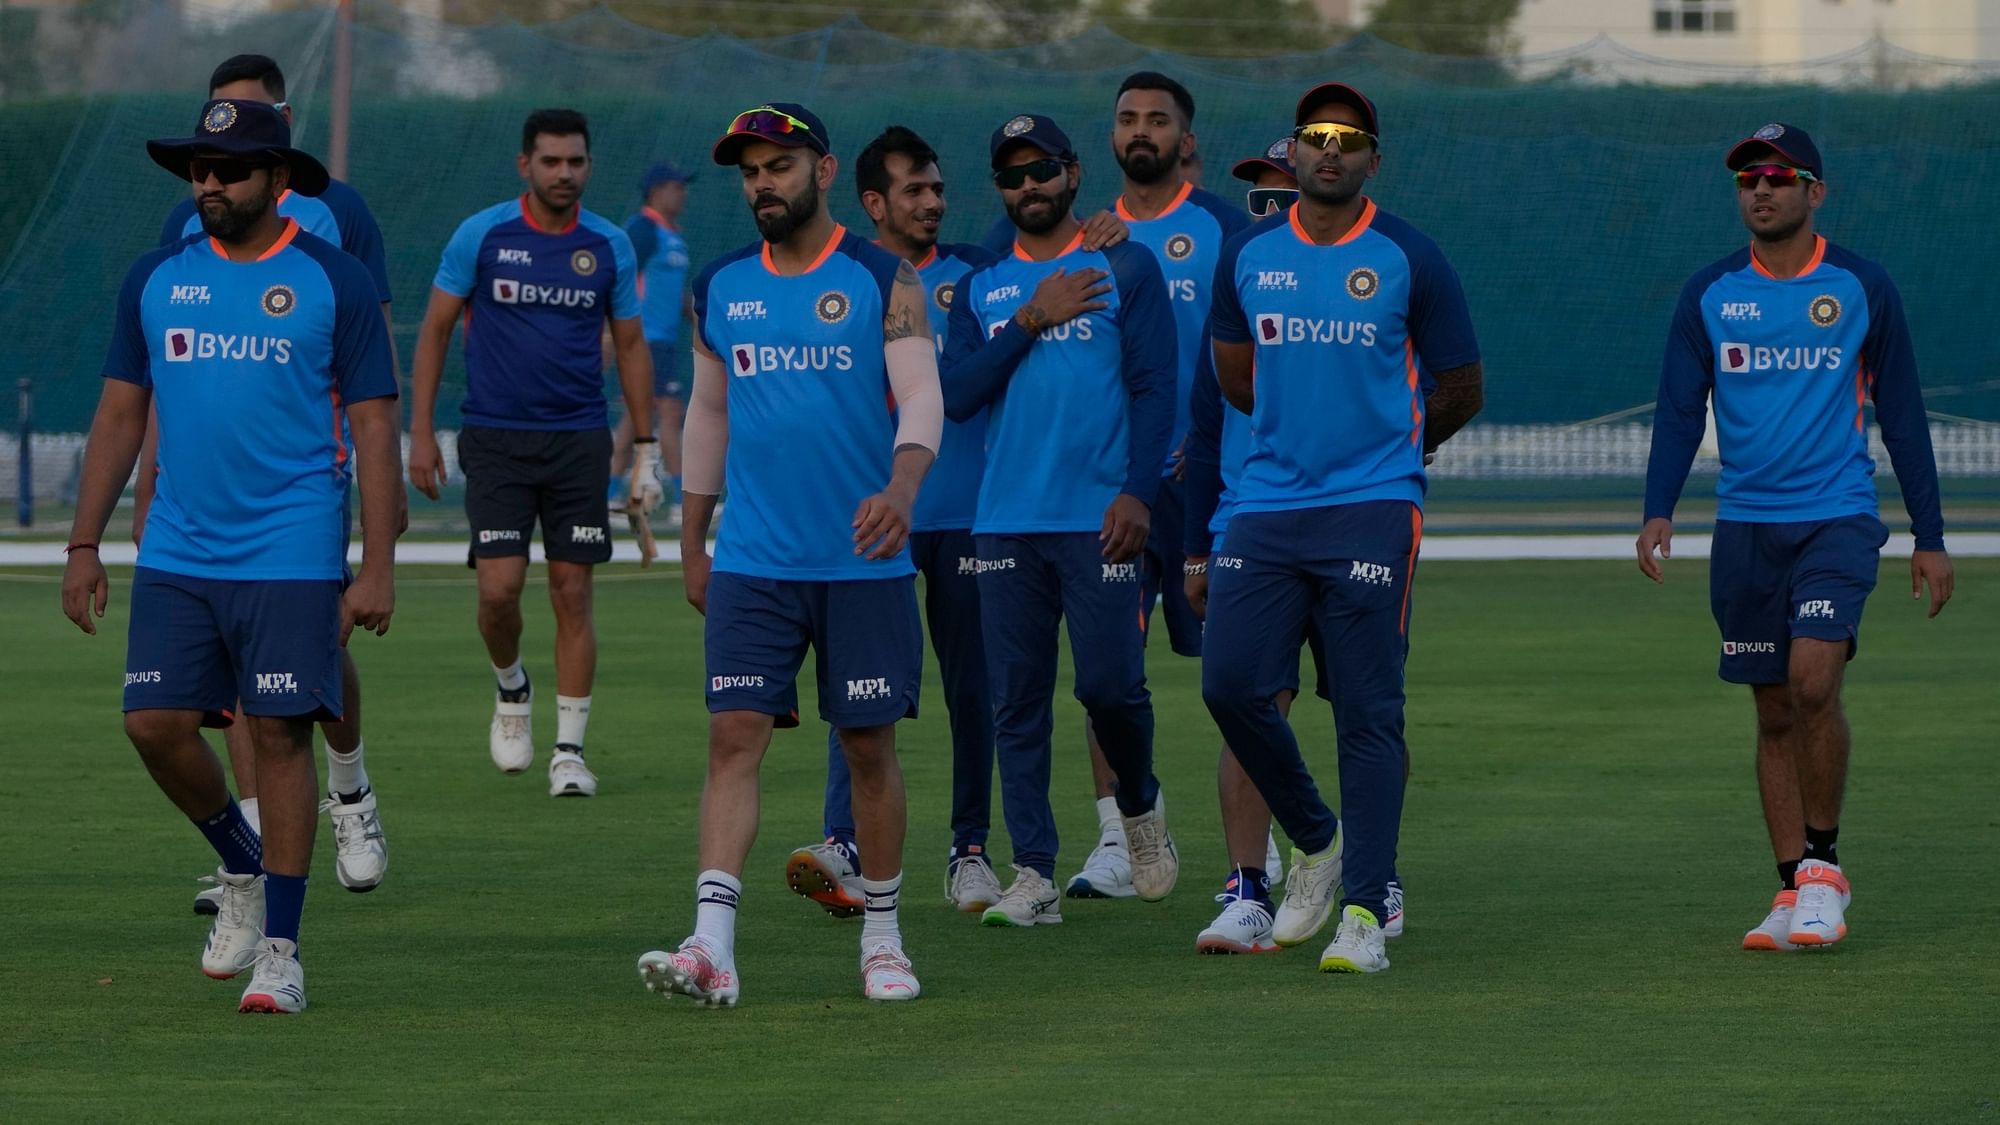 <div class="paragraphs"><p>The Indian team members during an Asia Cup 2022 training session in Dubai.&nbsp;</p></div>